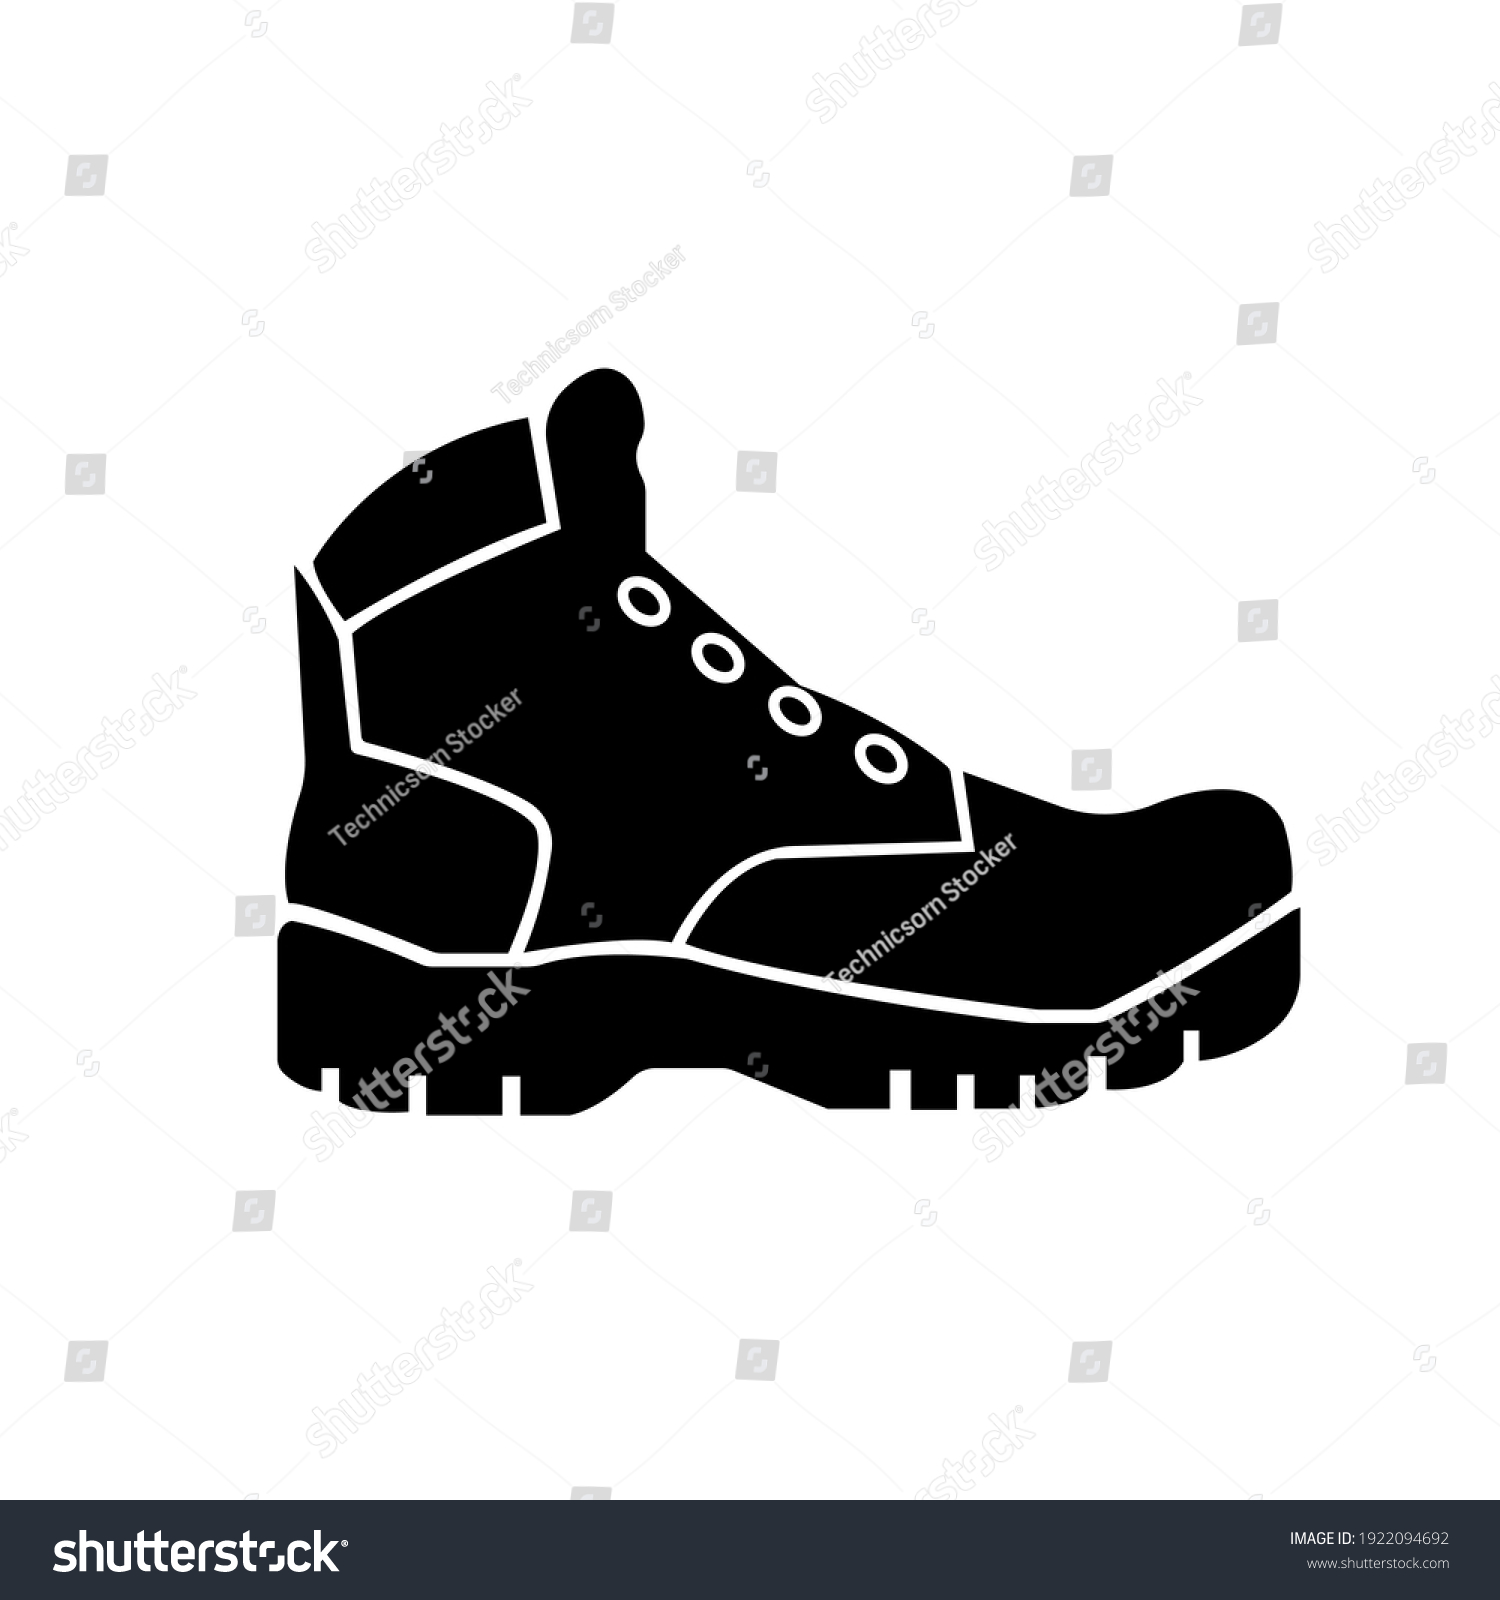 394 Closed toe shoes Images, Stock Photos & Vectors | Shutterstock